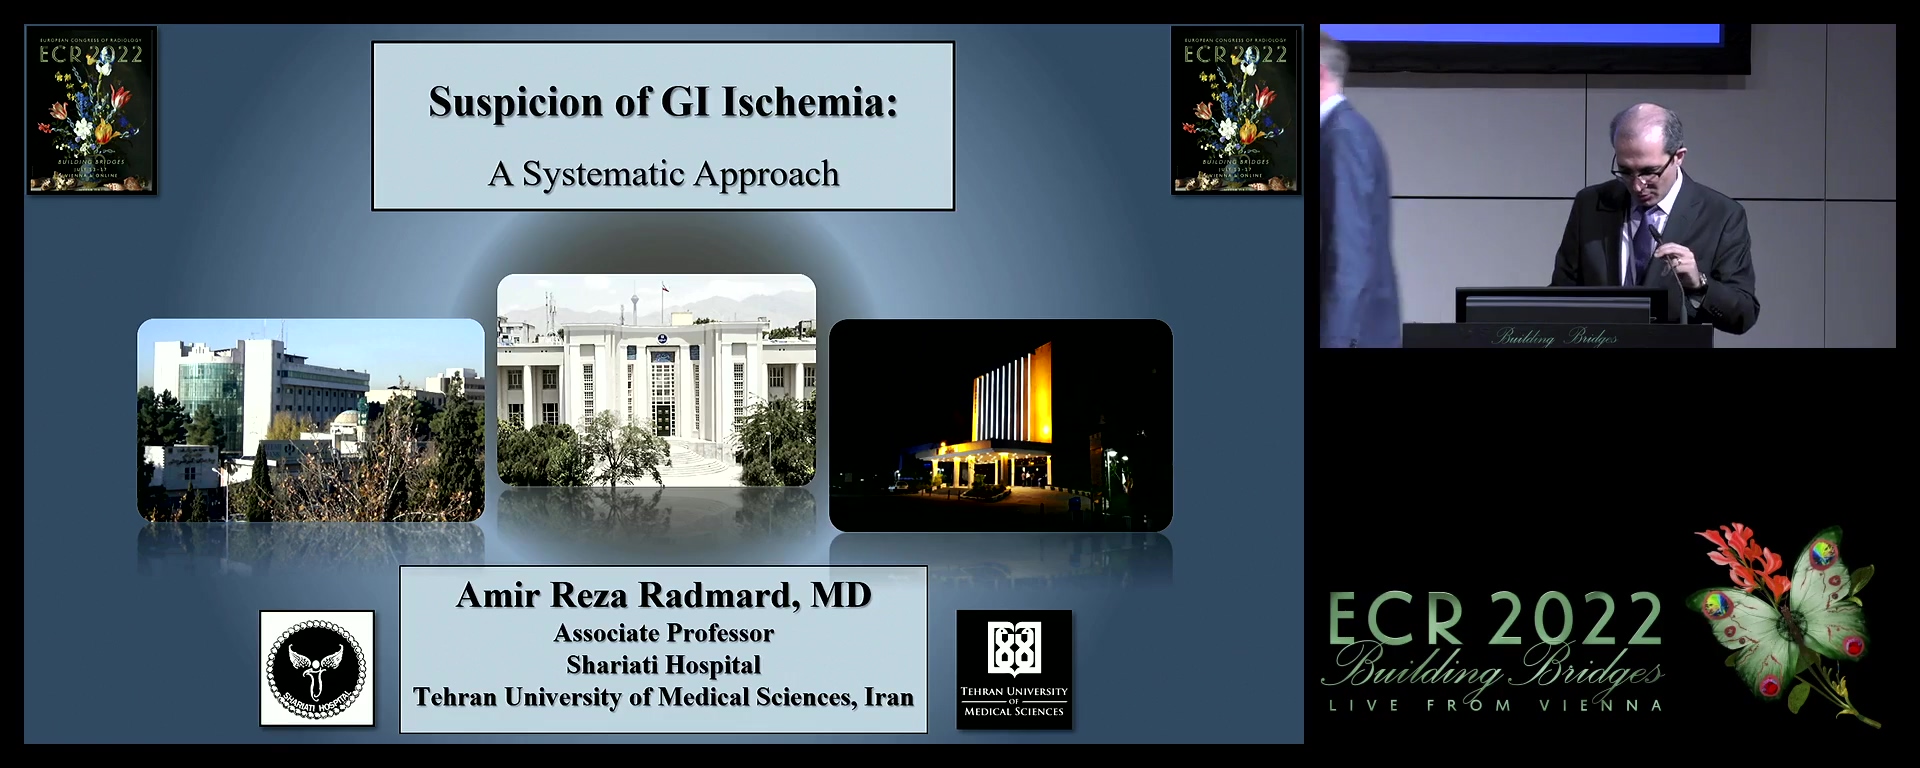 Suspicion of GI ischaemia: a systematic approach